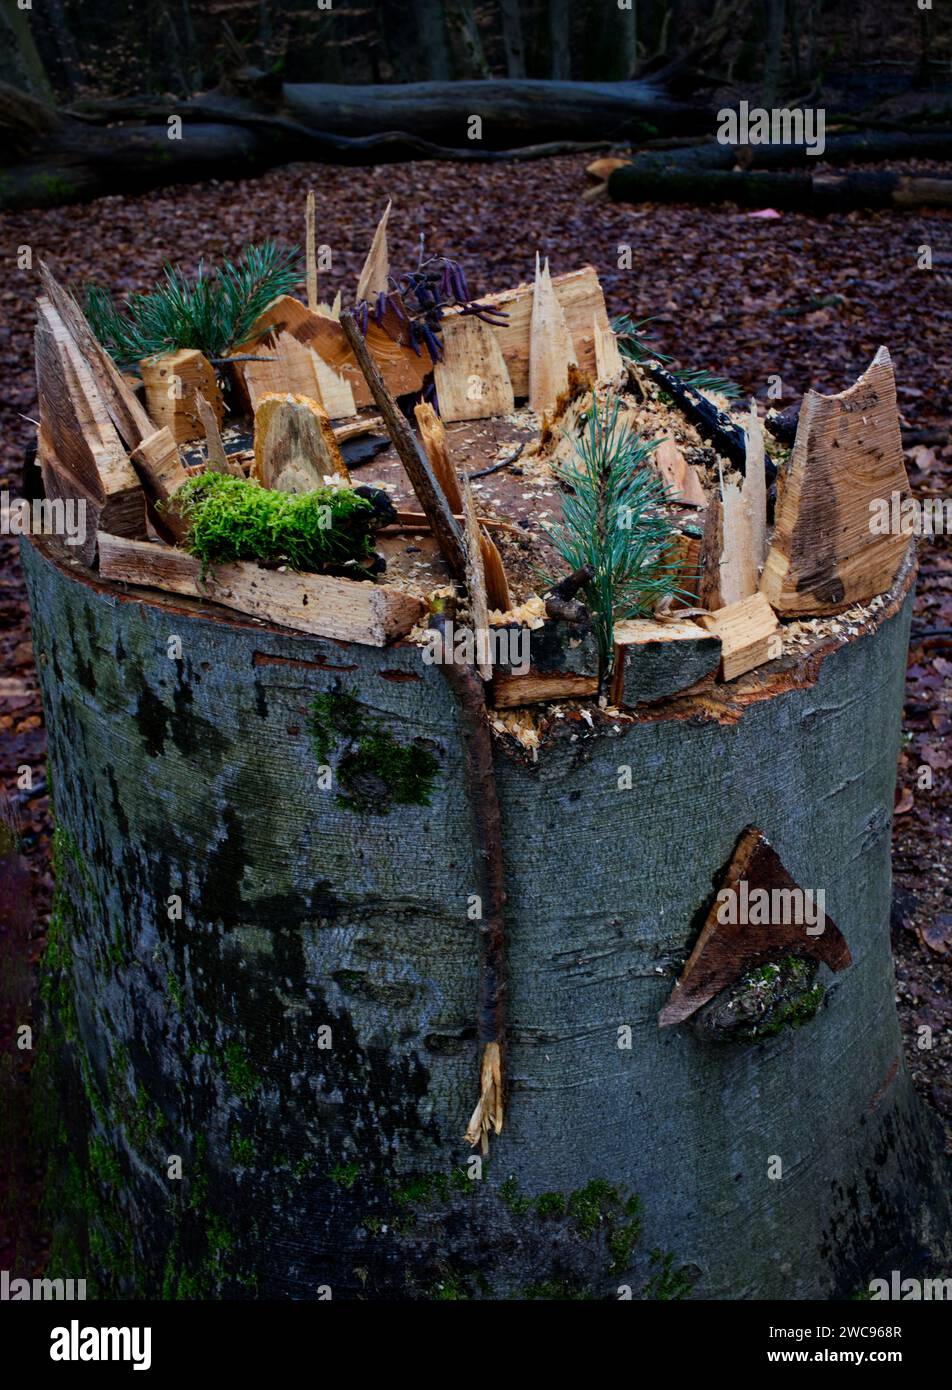 child's play in the forest, a miniature landscape arranged on a tree stump and built of natural materials Stock Photo